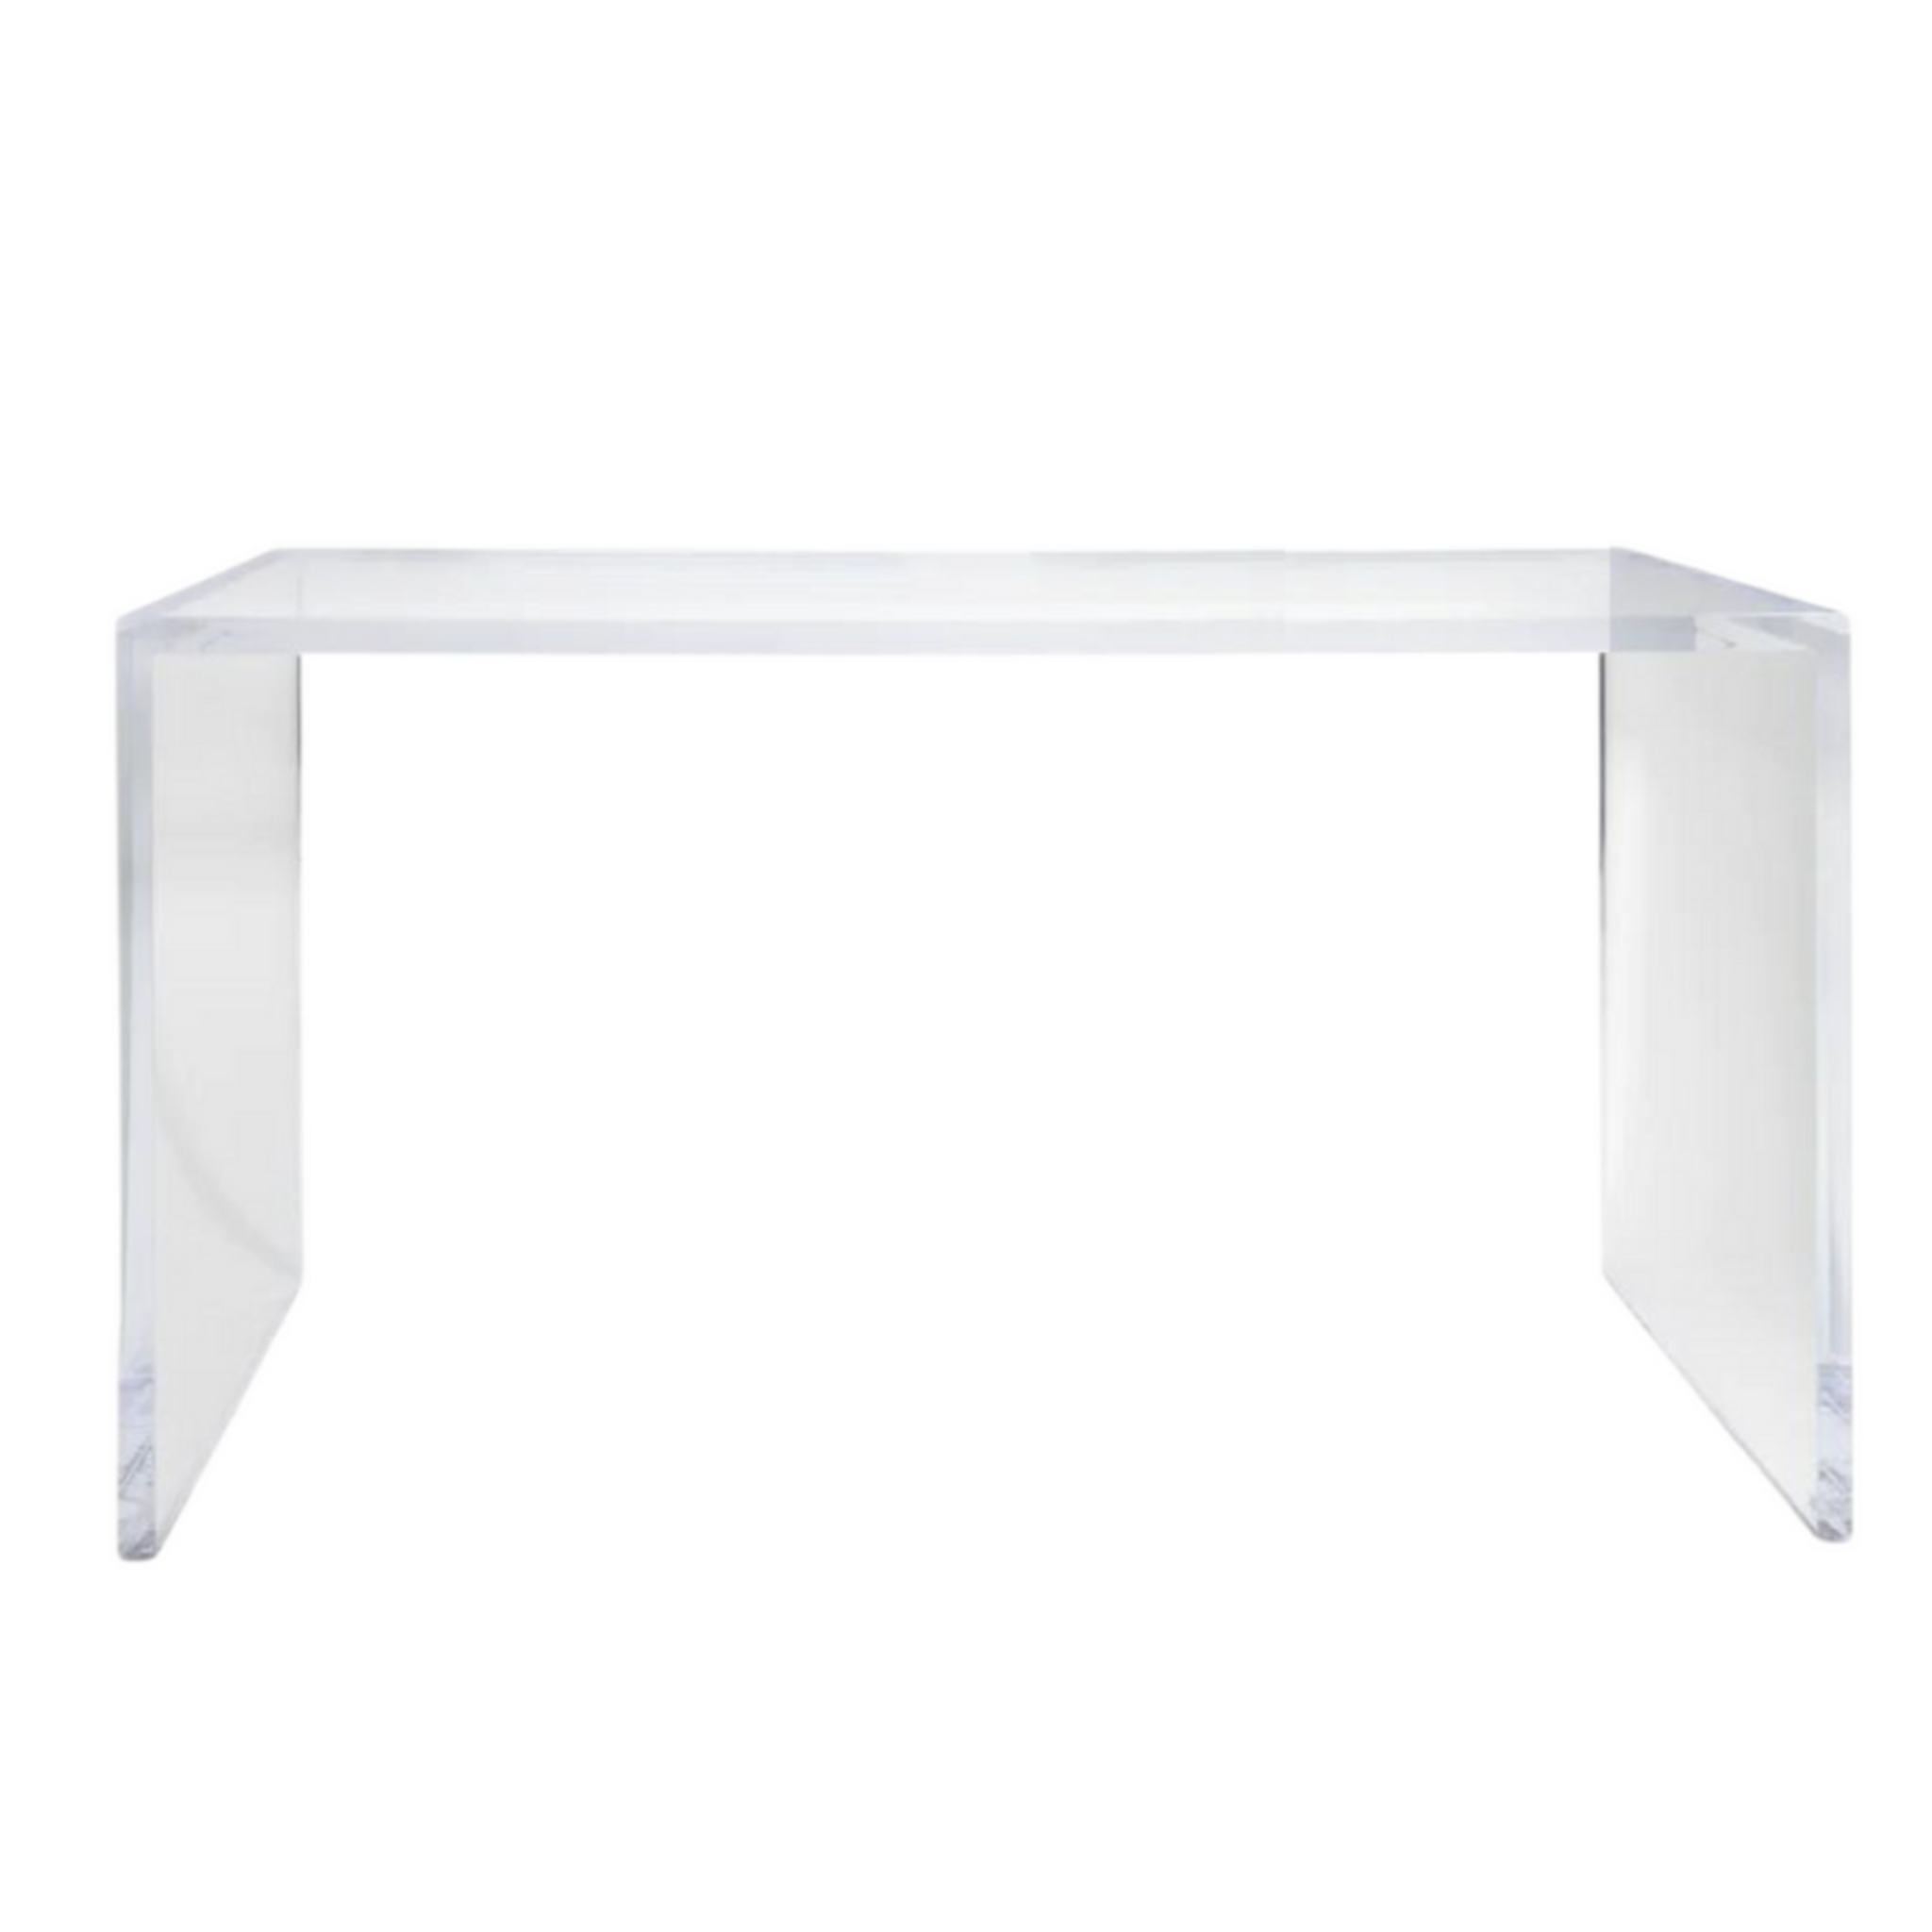 thick lucite clear acrylic desk